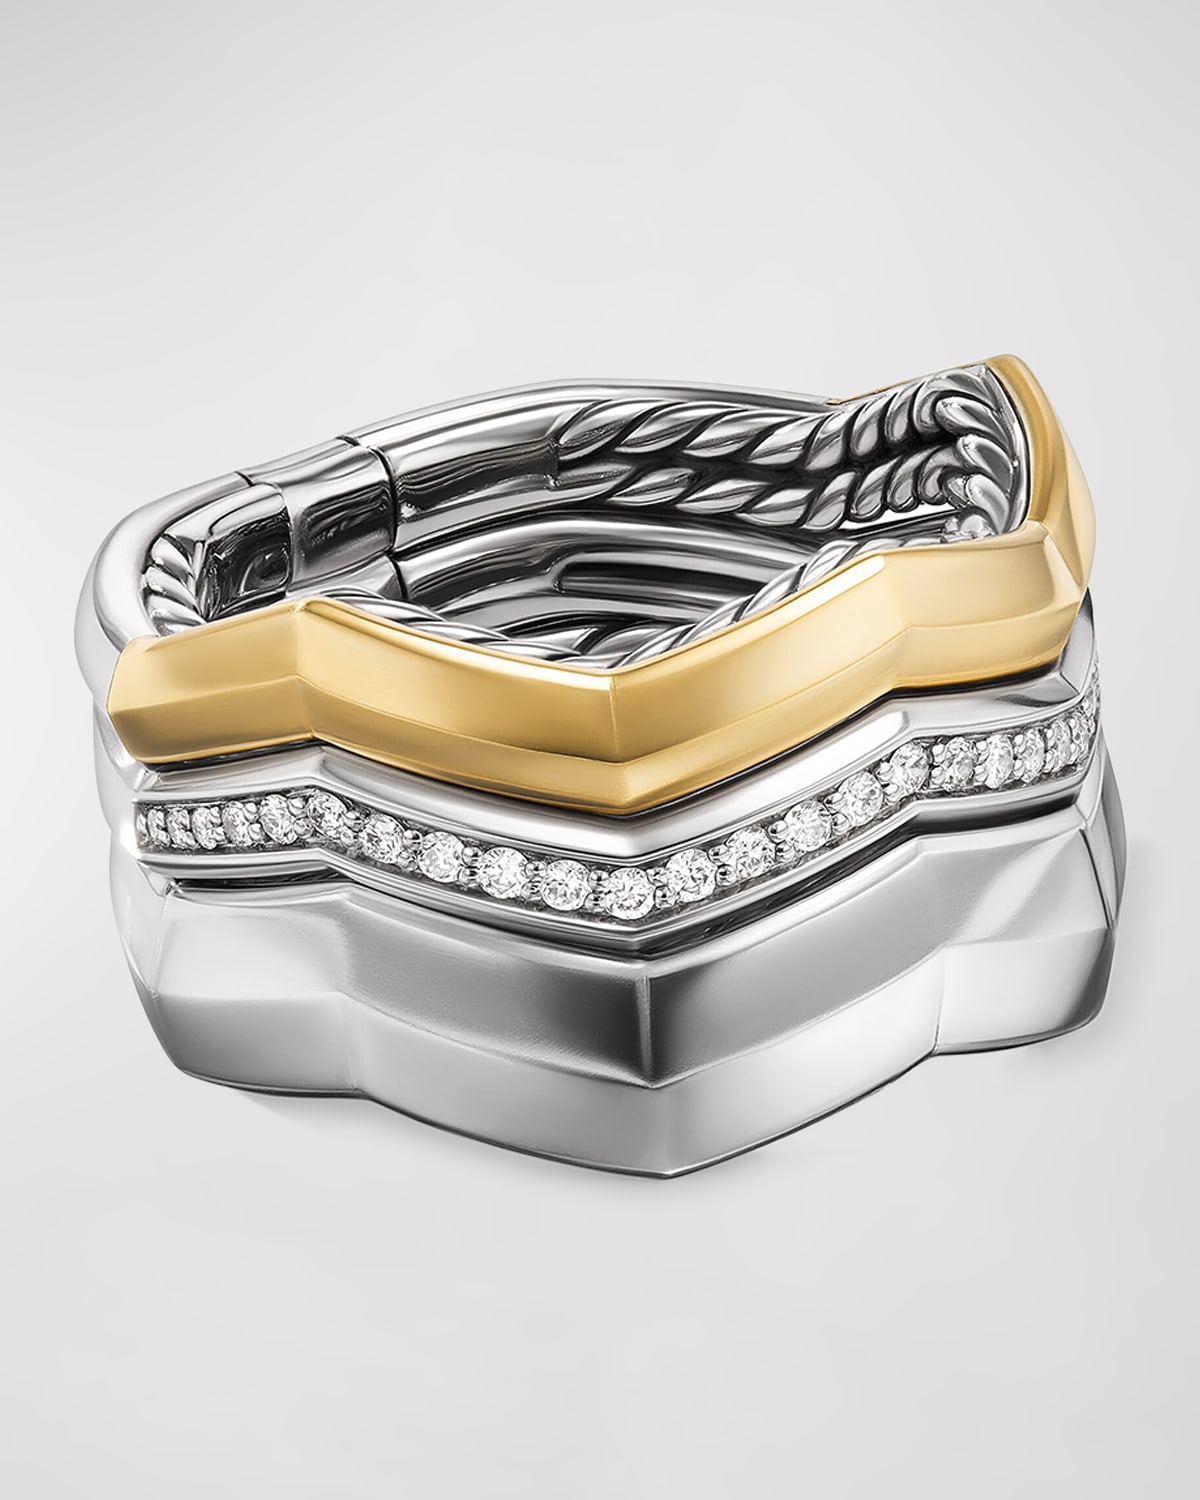 Stax 3 Row Ring with Diamonds in 18K Gold and Silver, 11mm